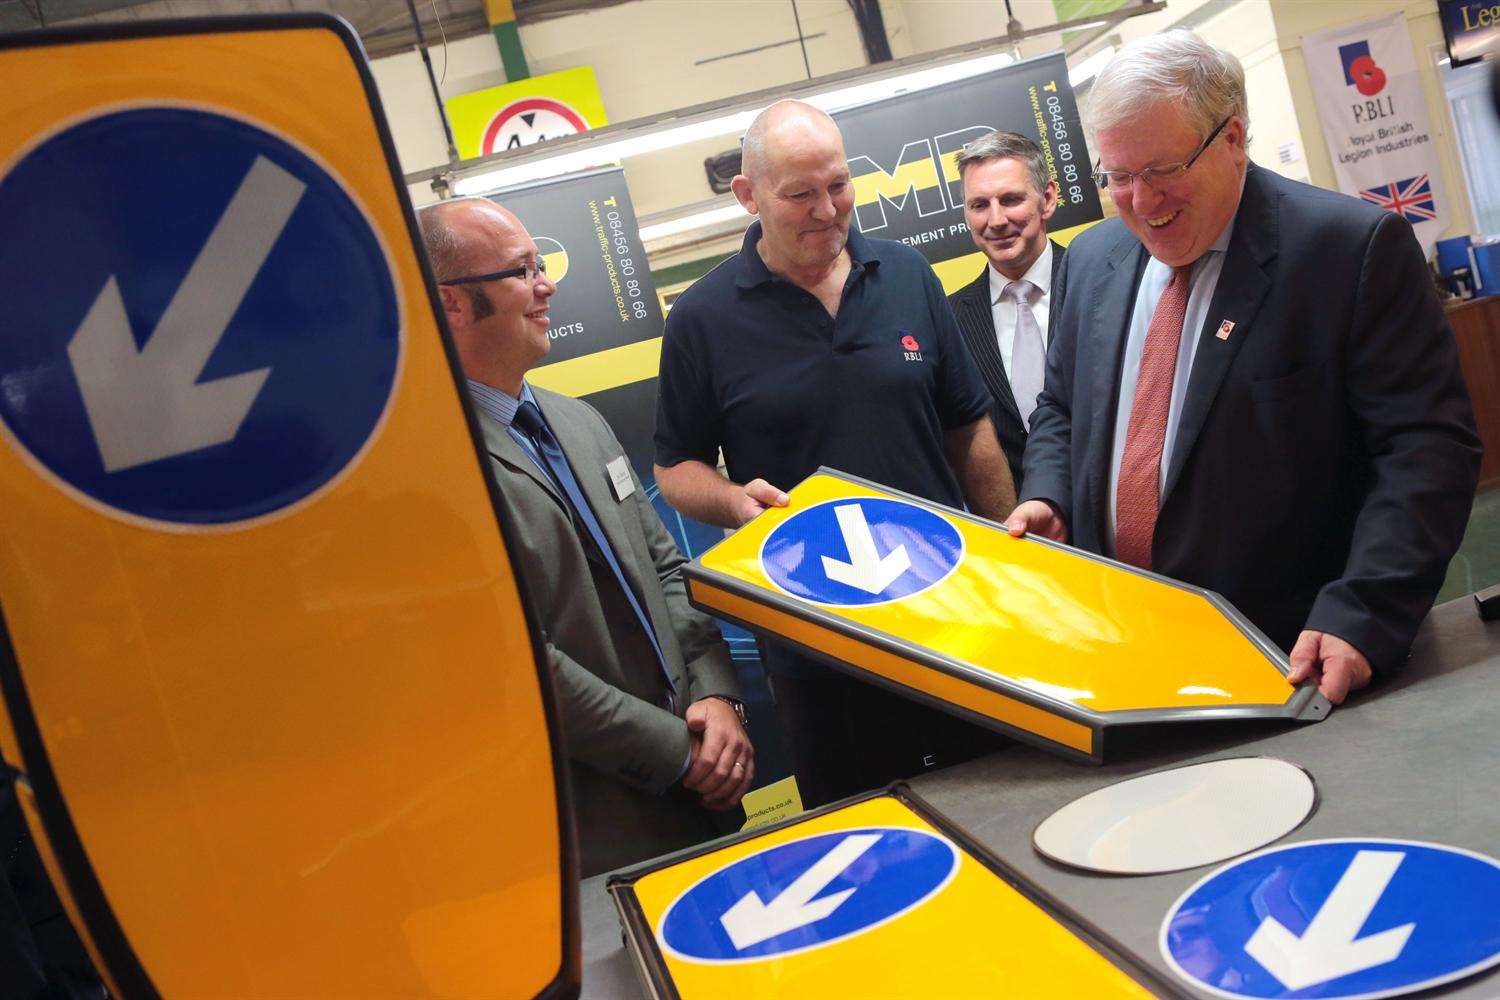 Transport Secretary Patrick McLoughlin visits Royal British Legion Industries to unveil new £350,000 modernisation of its road and rail signs factory